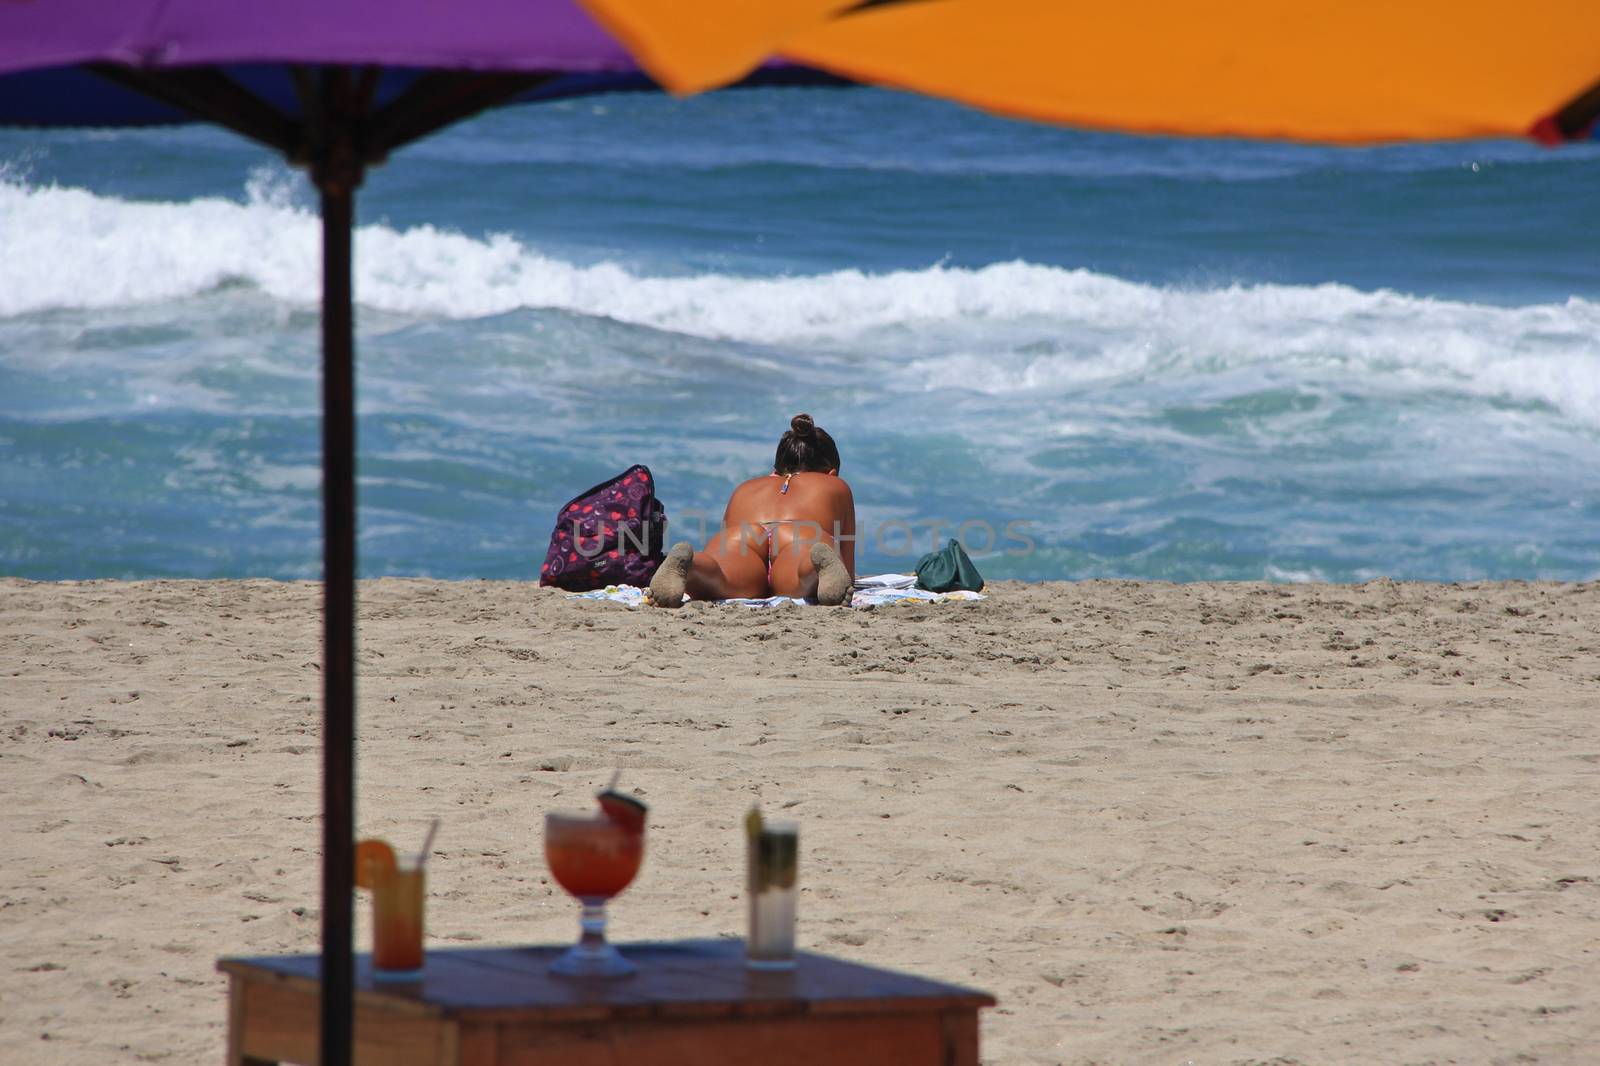 A young lady sun tanning at a beach restaurant in Puerto Escondido, Mexico
26 Mar 2013
No model release
Editorial only